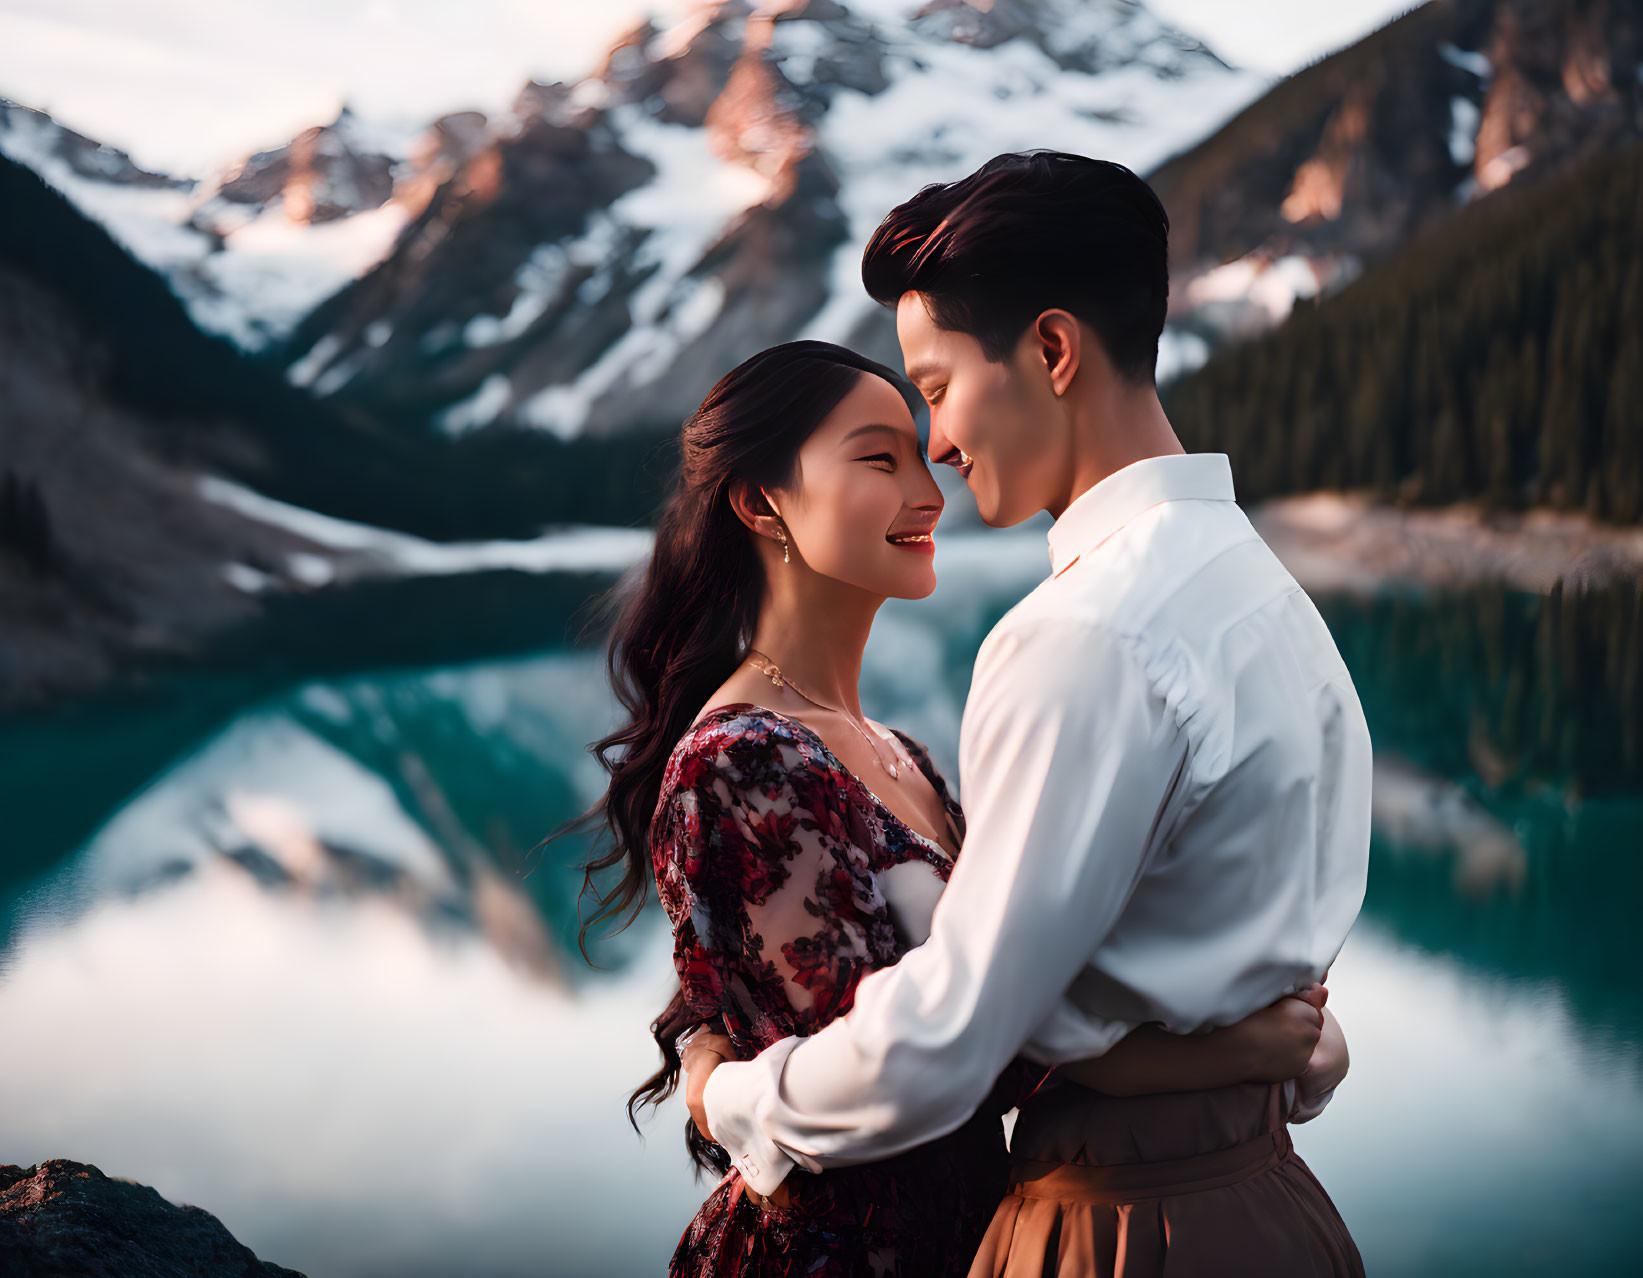 Couple embracing by serene mountain lake at dusk